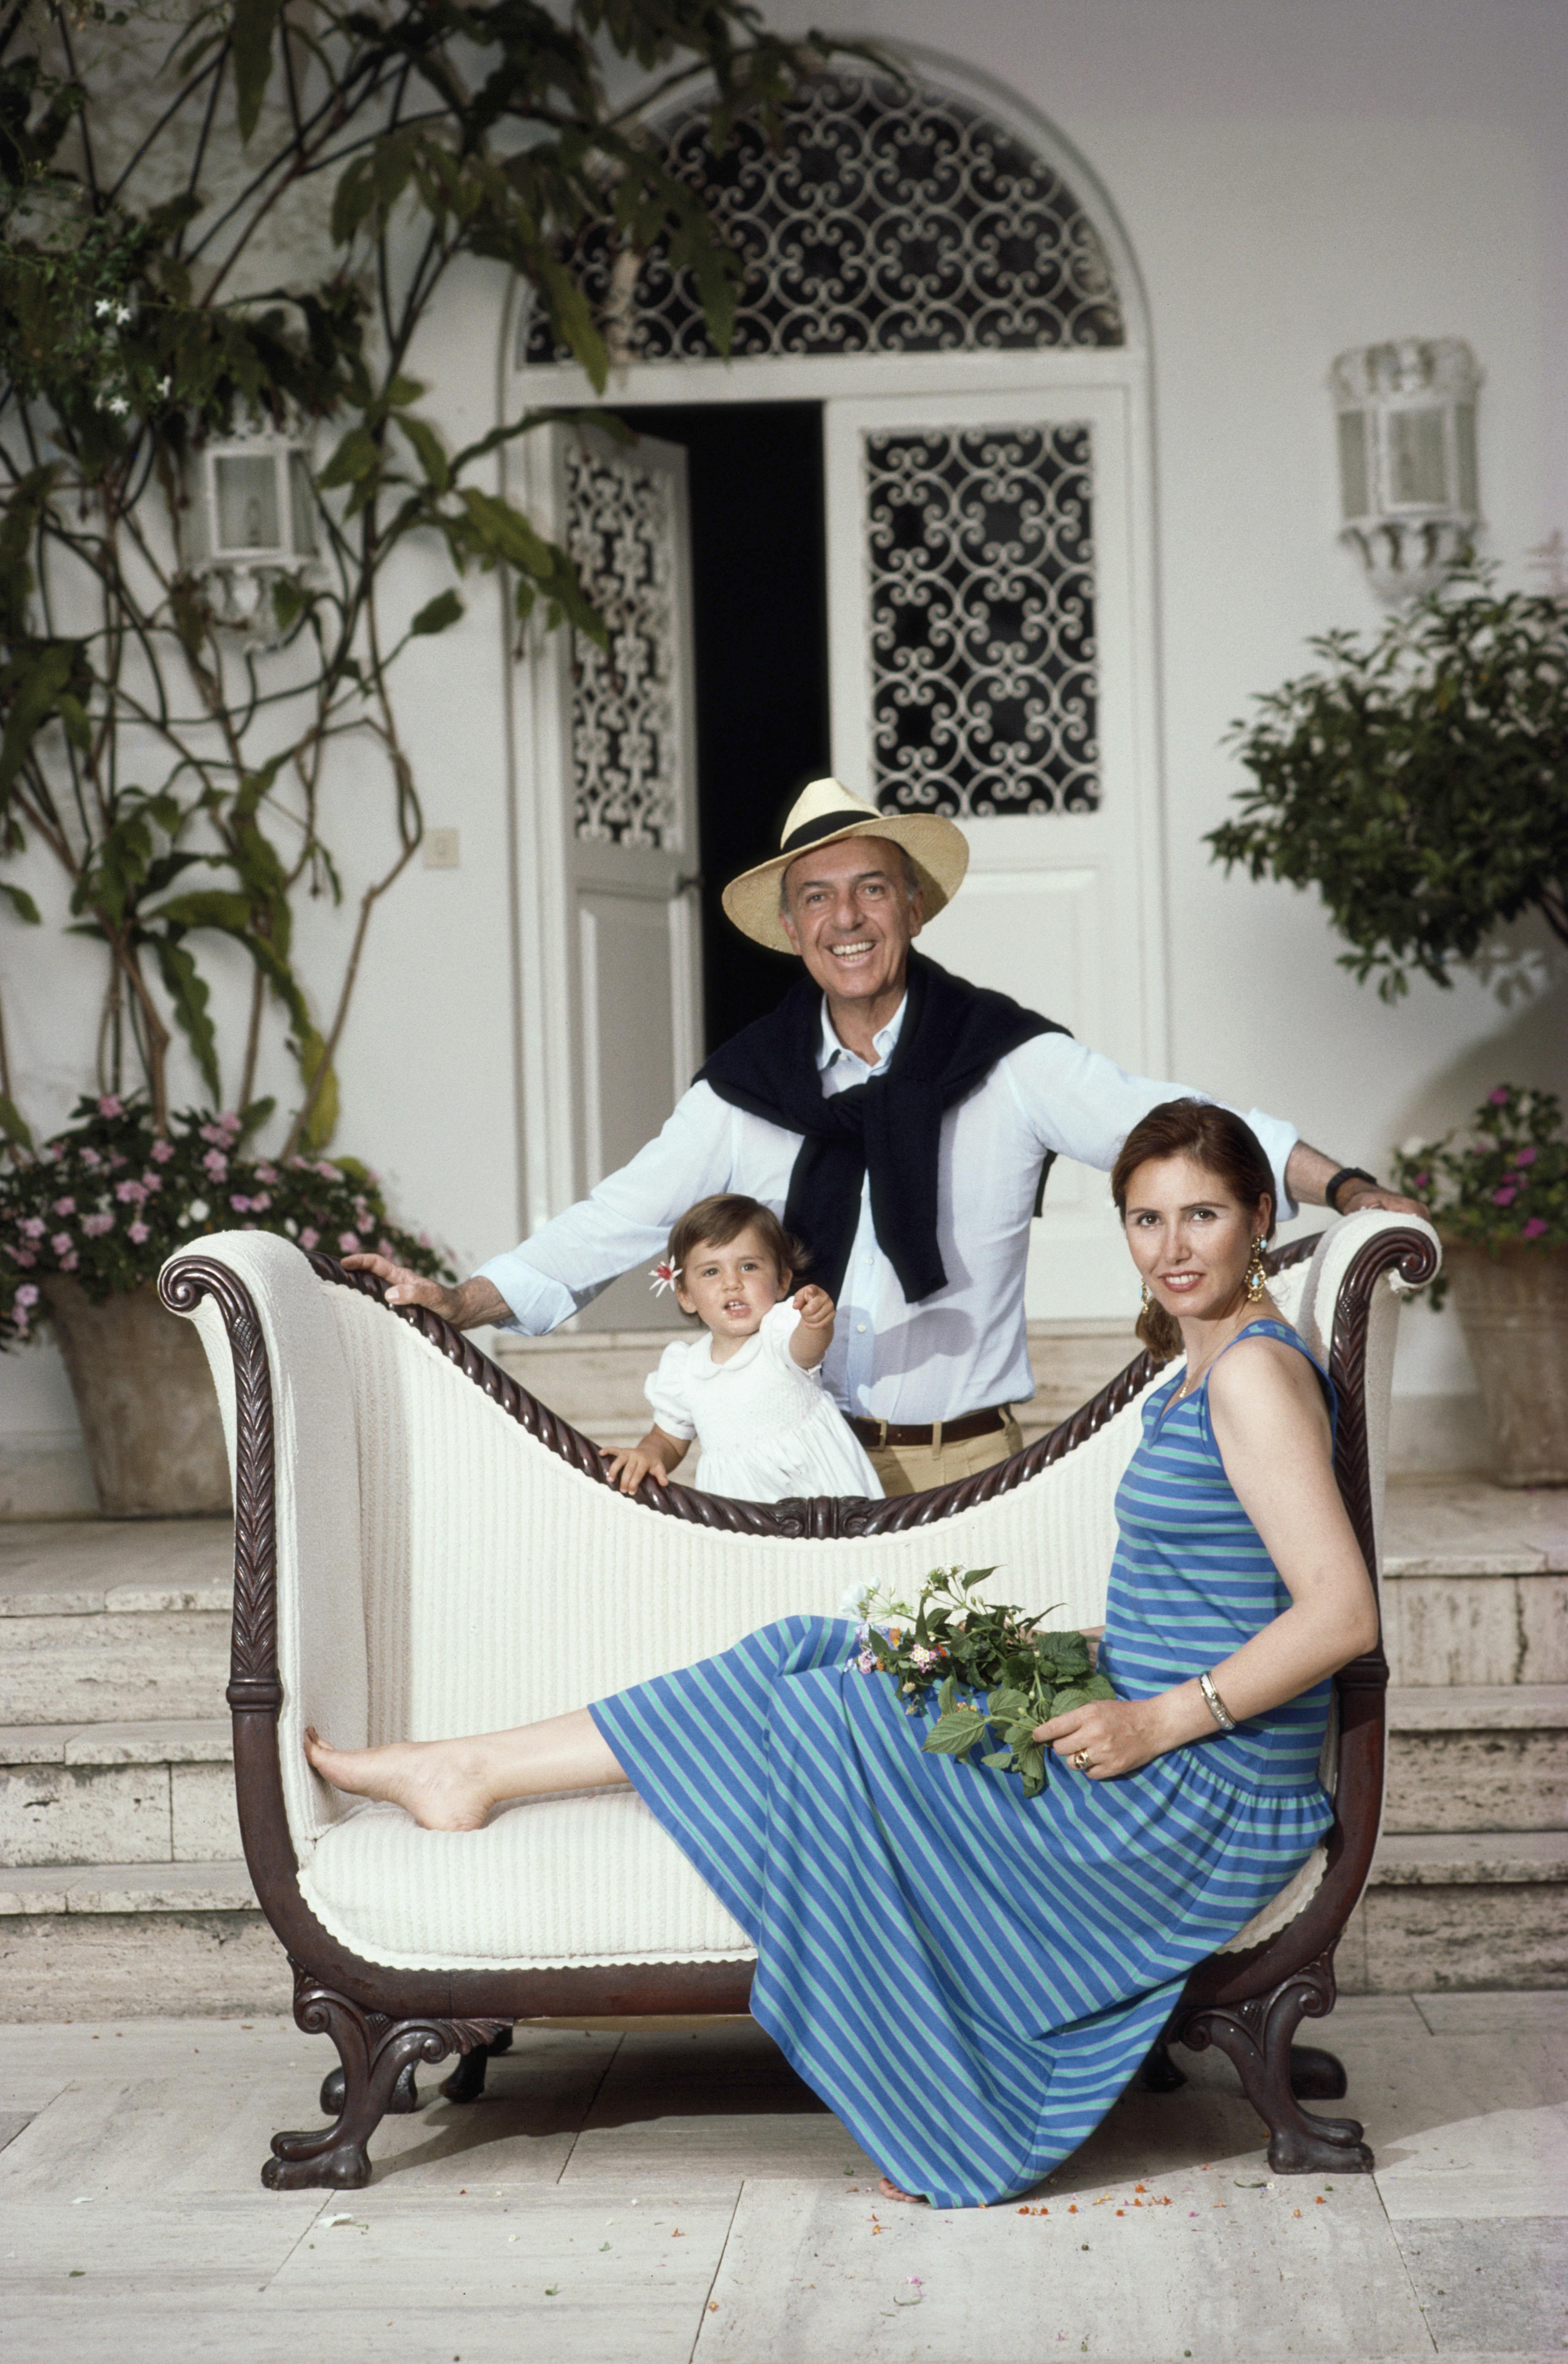 Royals on Capri
1989
C print
Estate stamped and hand numbered edition of 150 with certificate of authenticity from the estate.   

Sforza Marescotto dei Principi Ruspoli and his wife, Pia Ruspoli, pose with their daughter, Giacinta Ortensia Rosa